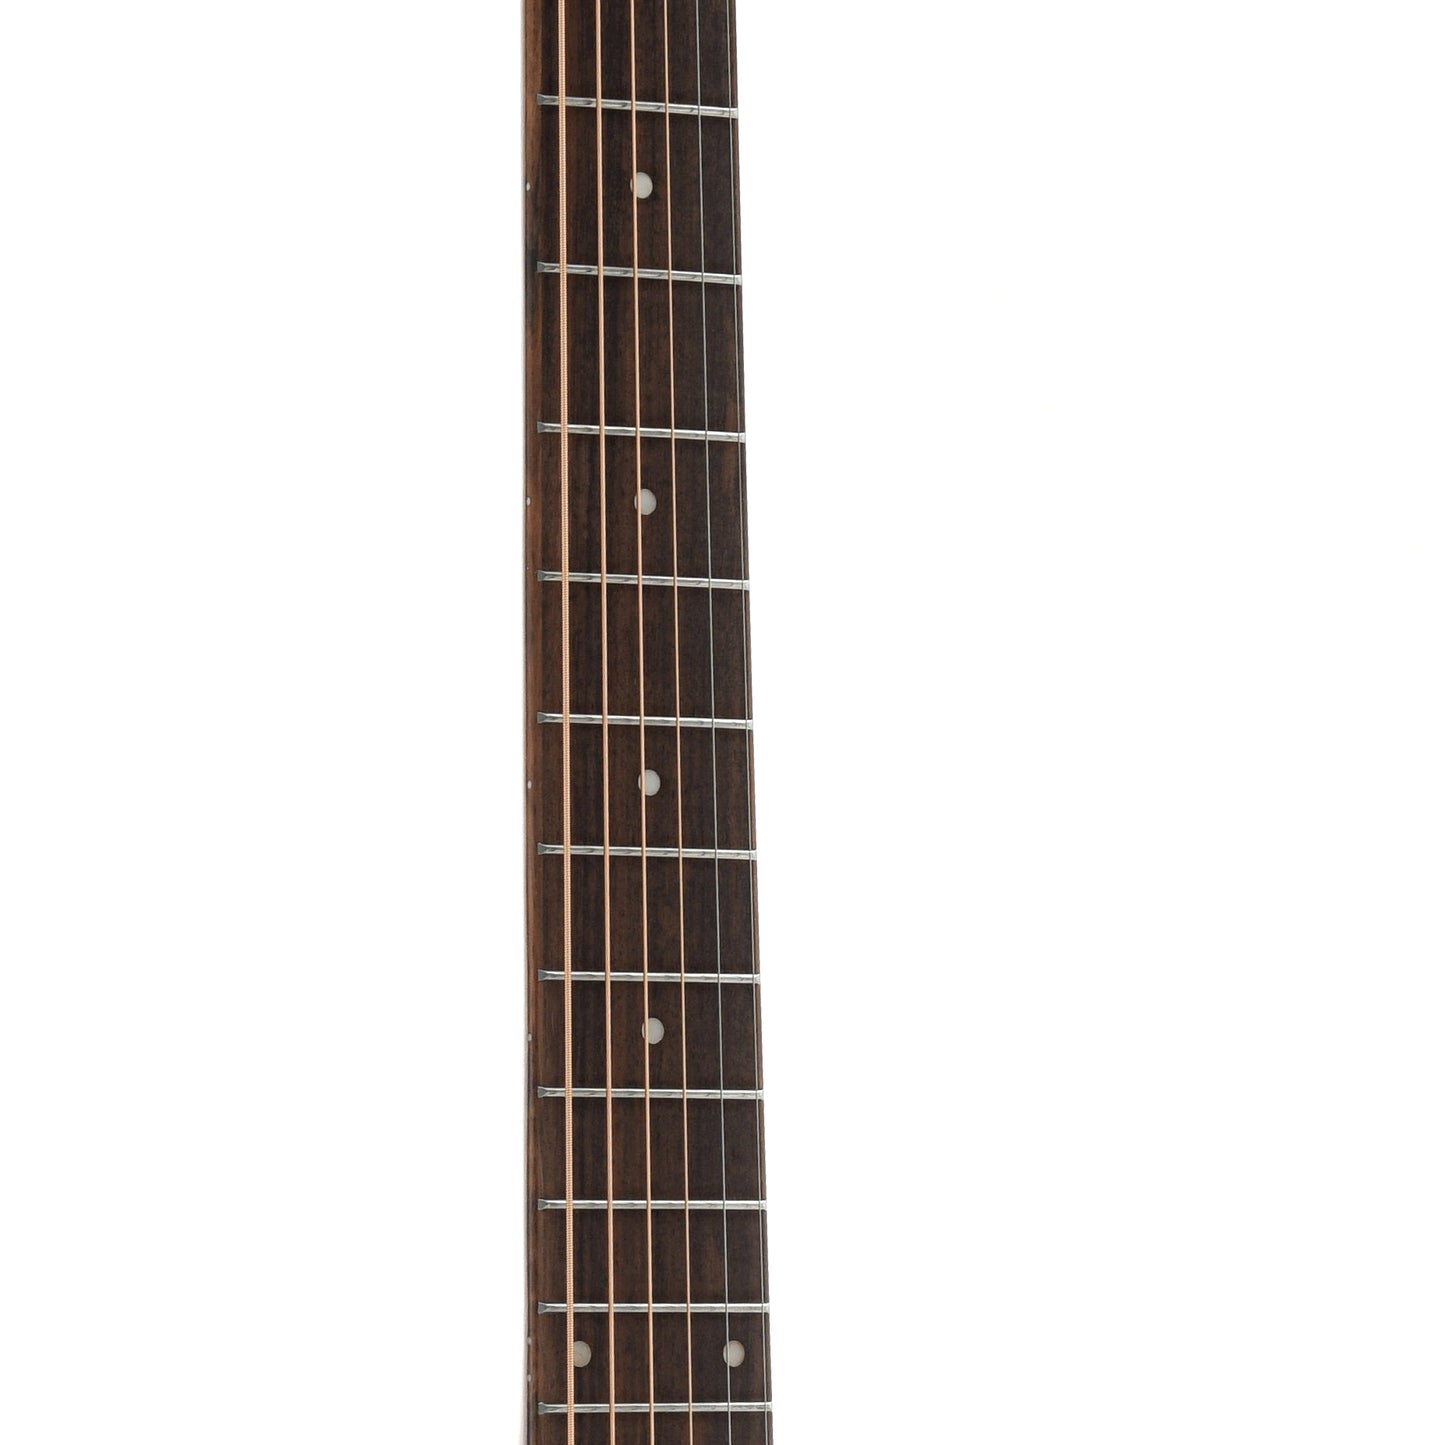 Image 6 of Blueridge Contemporary Series BR-60 Limited Edition Dreadnought Guitar & Gigbag - SKU# BR60LE : Product Type Flat-top Guitars : Elderly Instruments